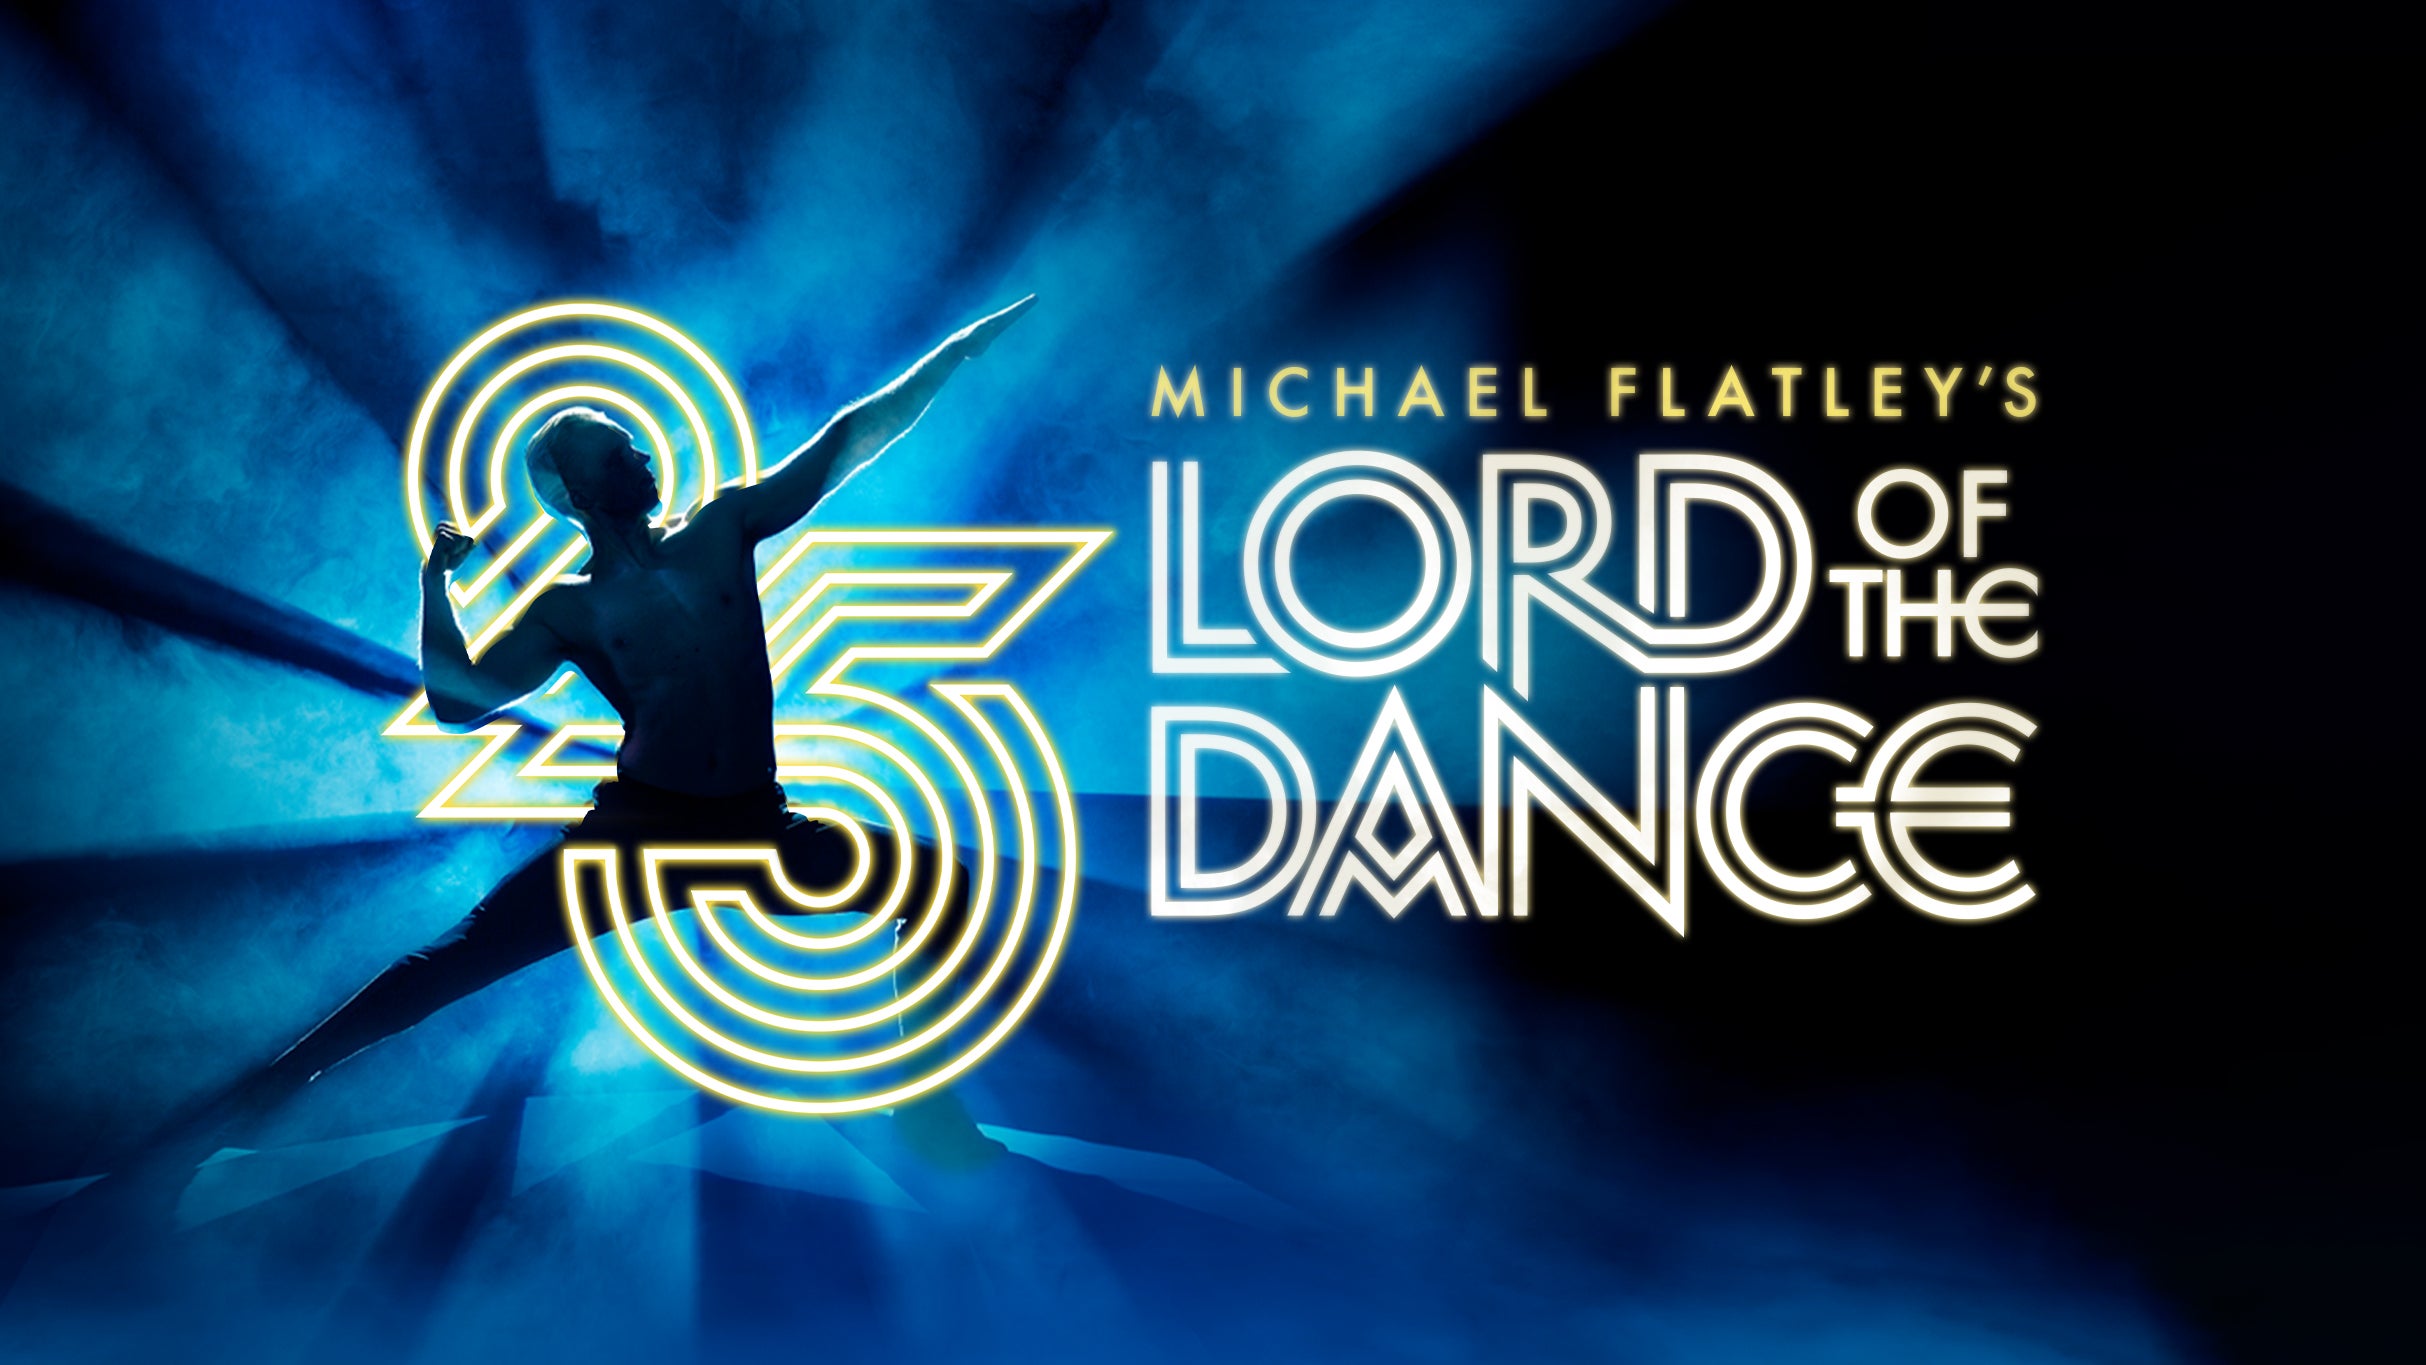 Michael Flatley s Lord of the Dance – 25th Anniversary Tour